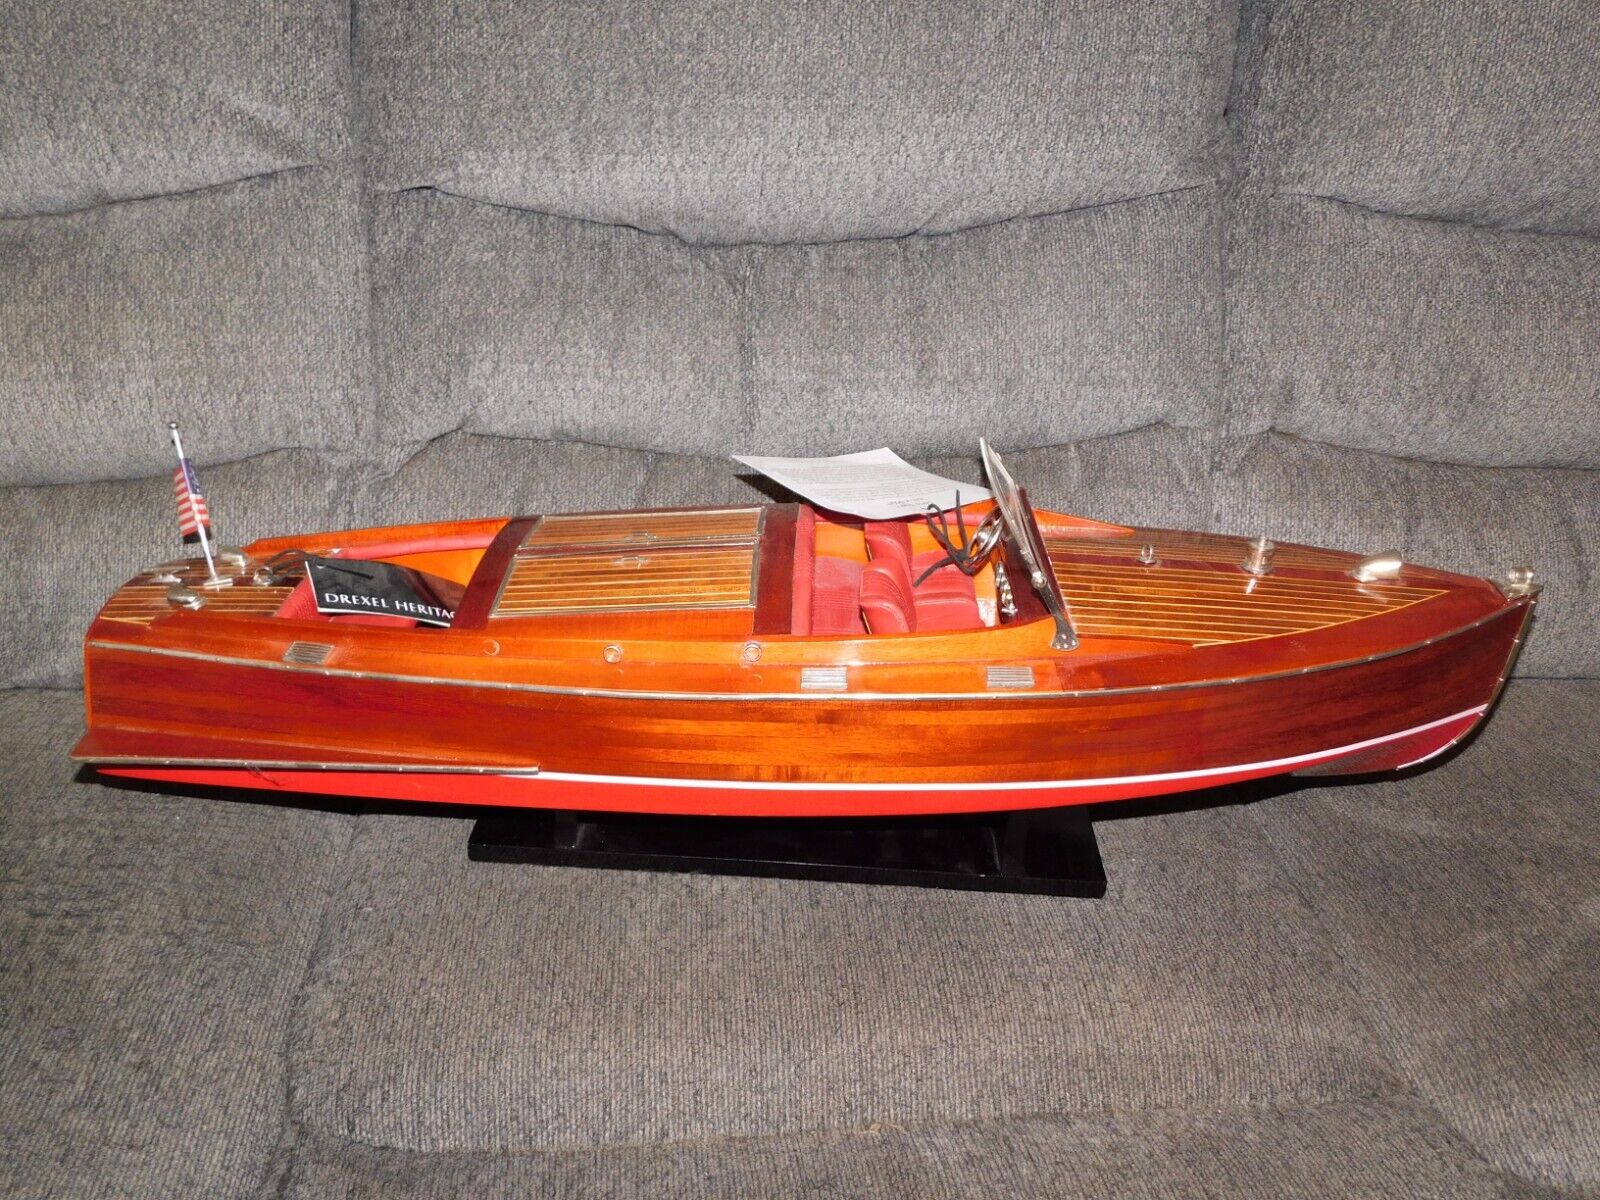 Drexel Heritage Replica of Chris Craft Wooden Model Racing Boat RUN-A-BOUT